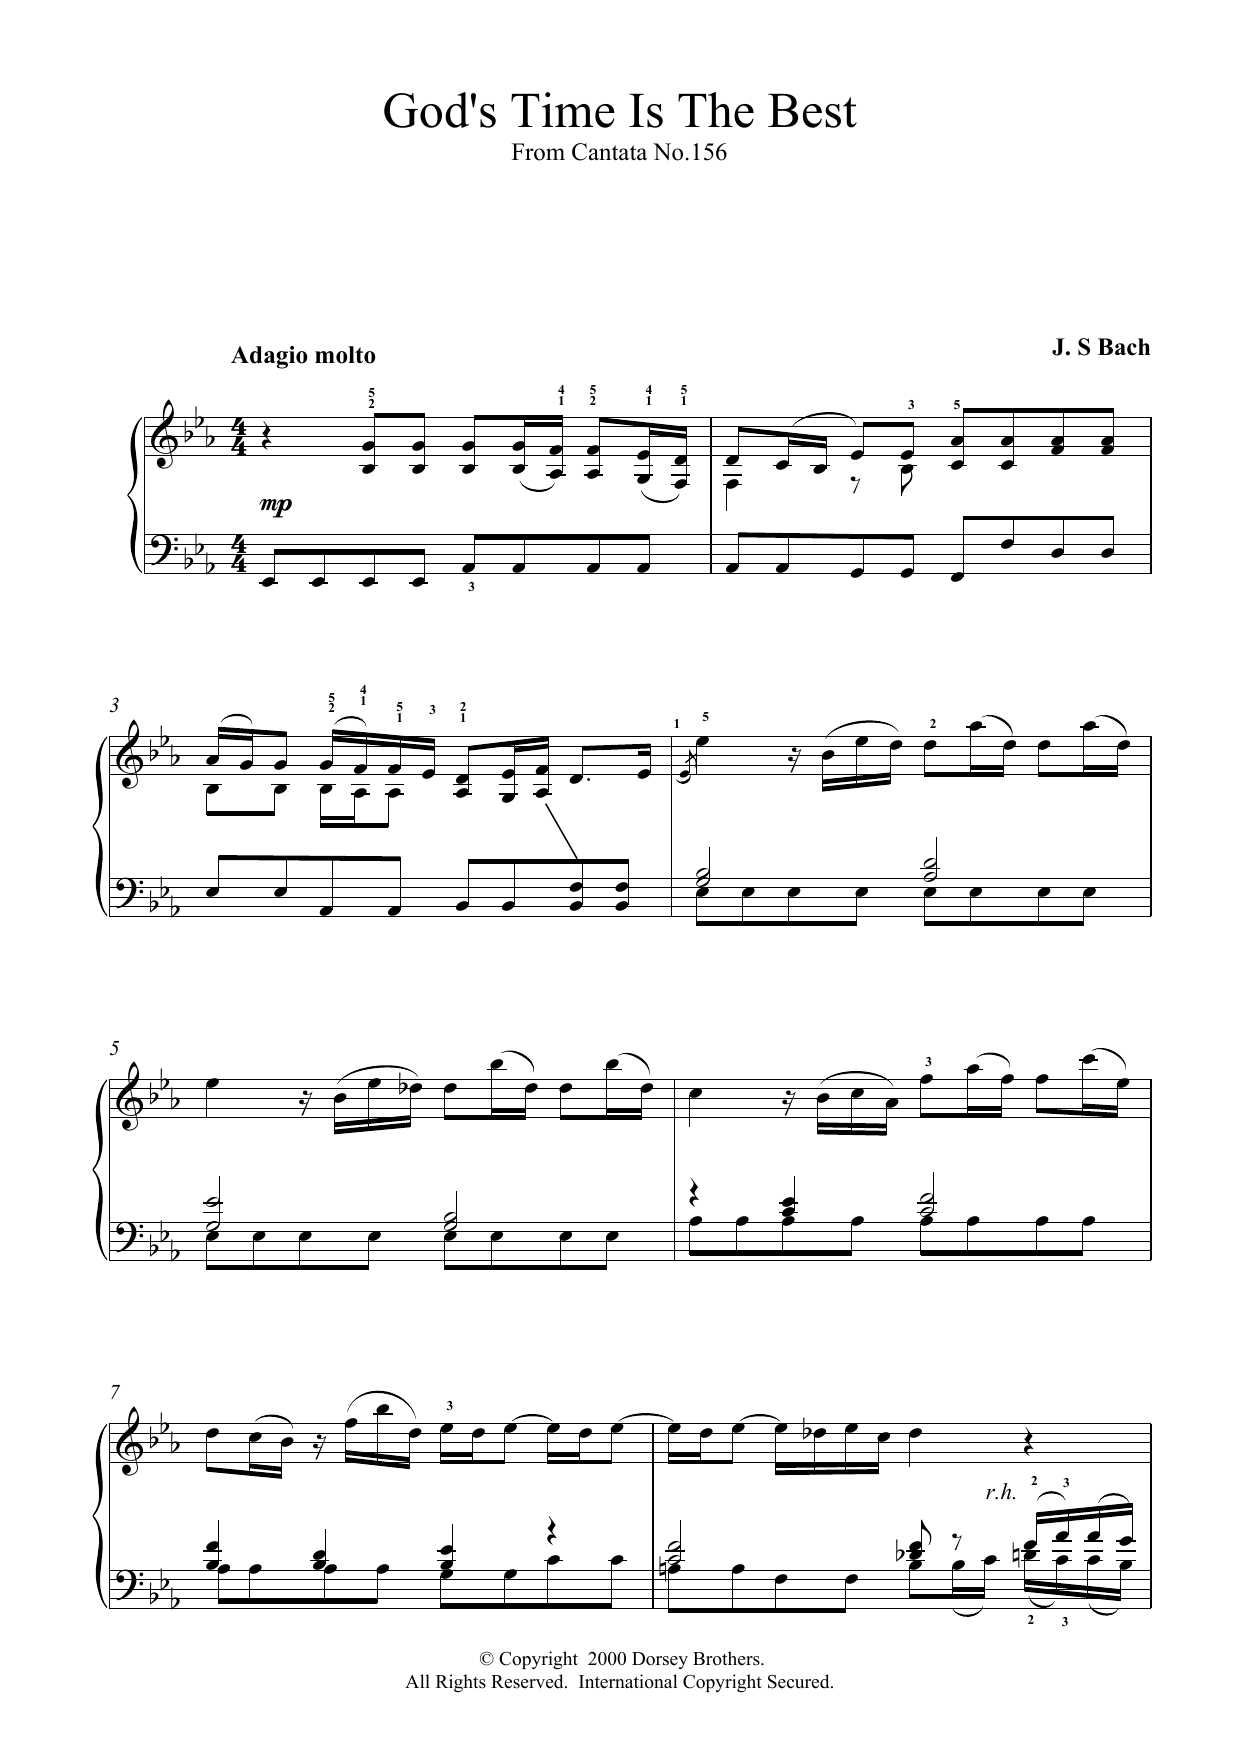 Johann Sebastian Bach God's Time Is The Best sheet music notes and chords - Download Printable PDF and start playing in minutes.